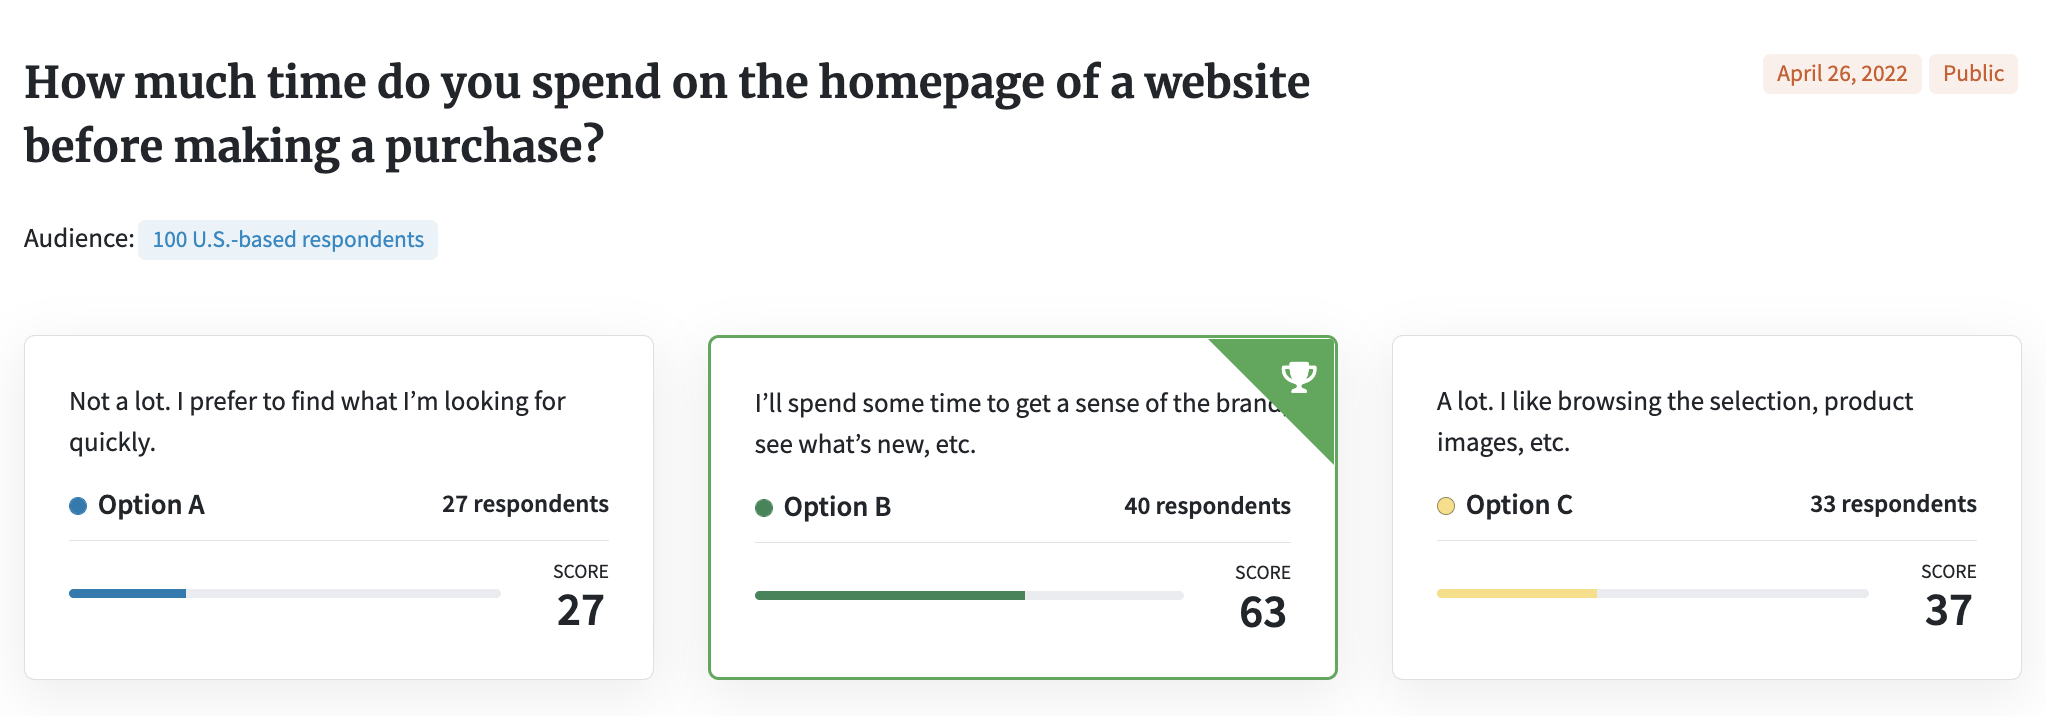 Screenshot of PickFu poll asking "How much time do you spend on the homepage of a website before making a purchase?"